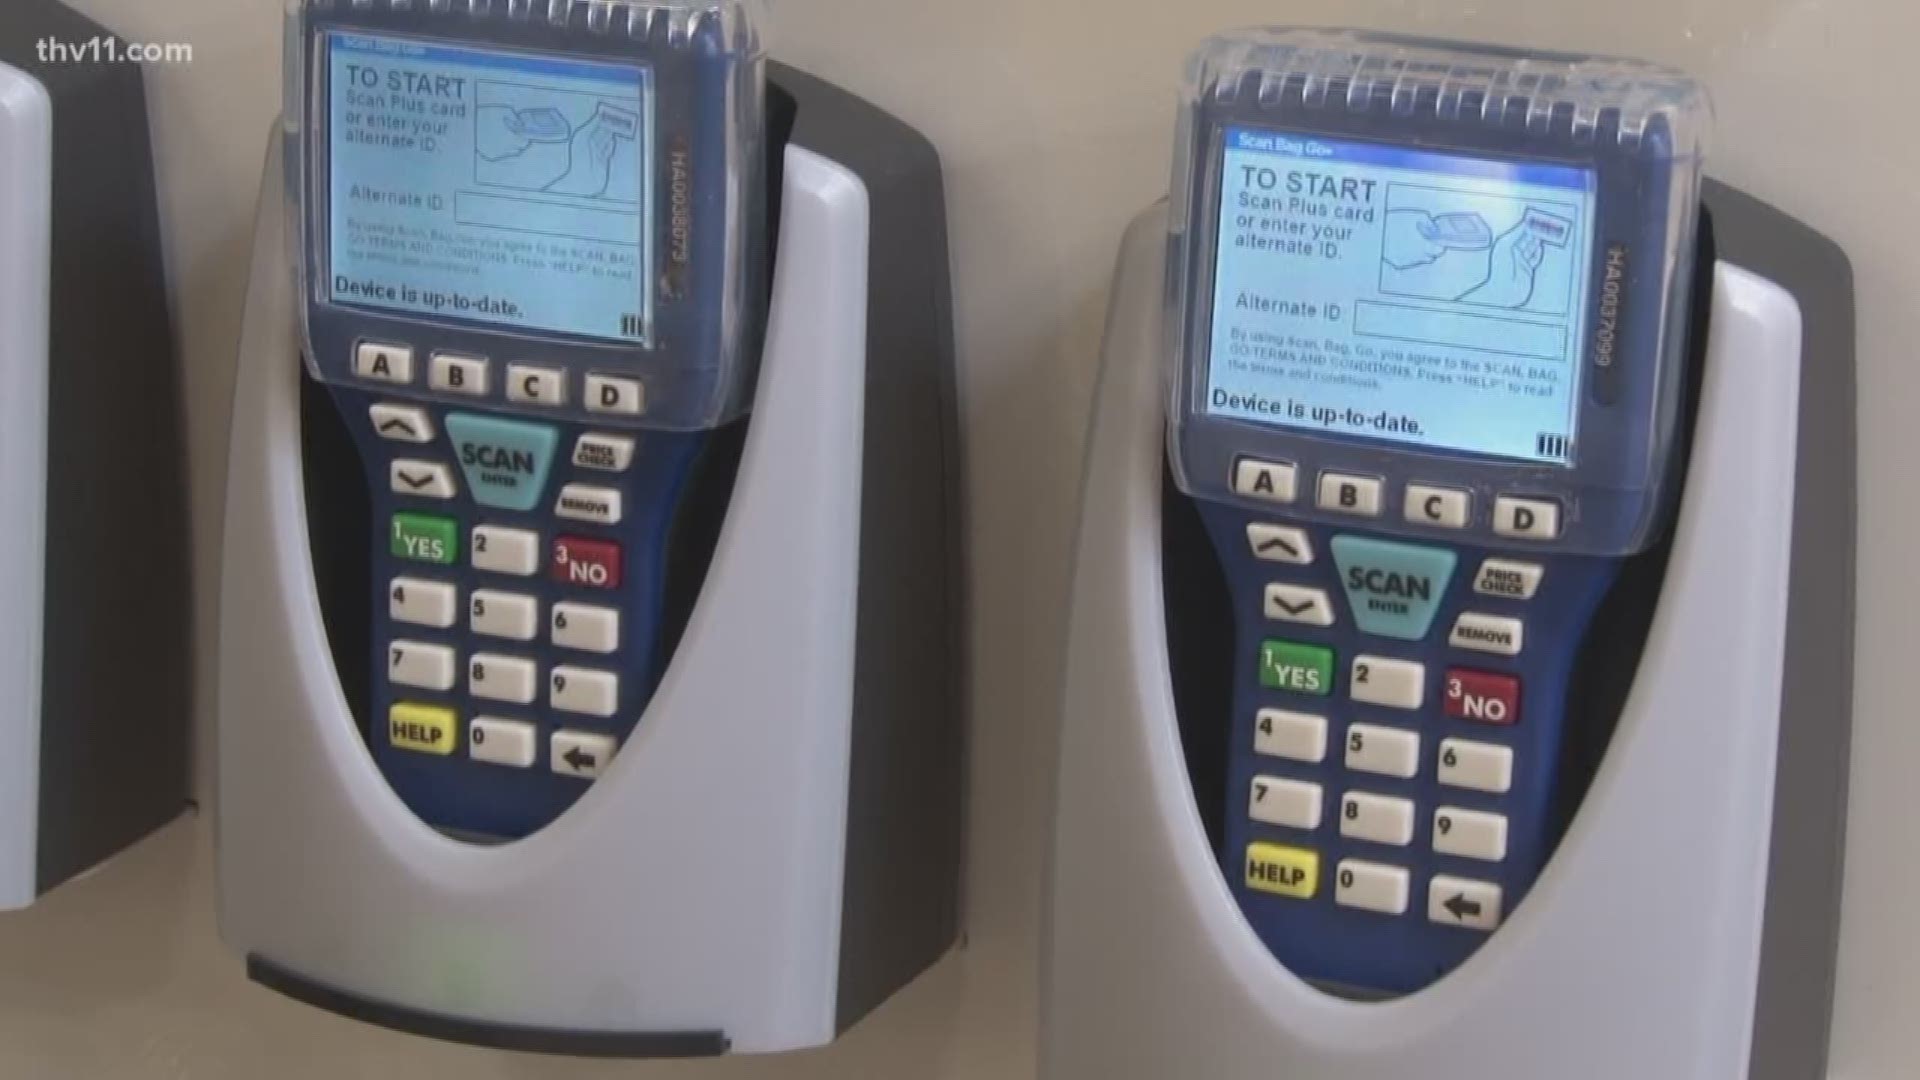 Want to skip the lines? Well, now you can with Kroger's "Scan, Bag, Go" technology.